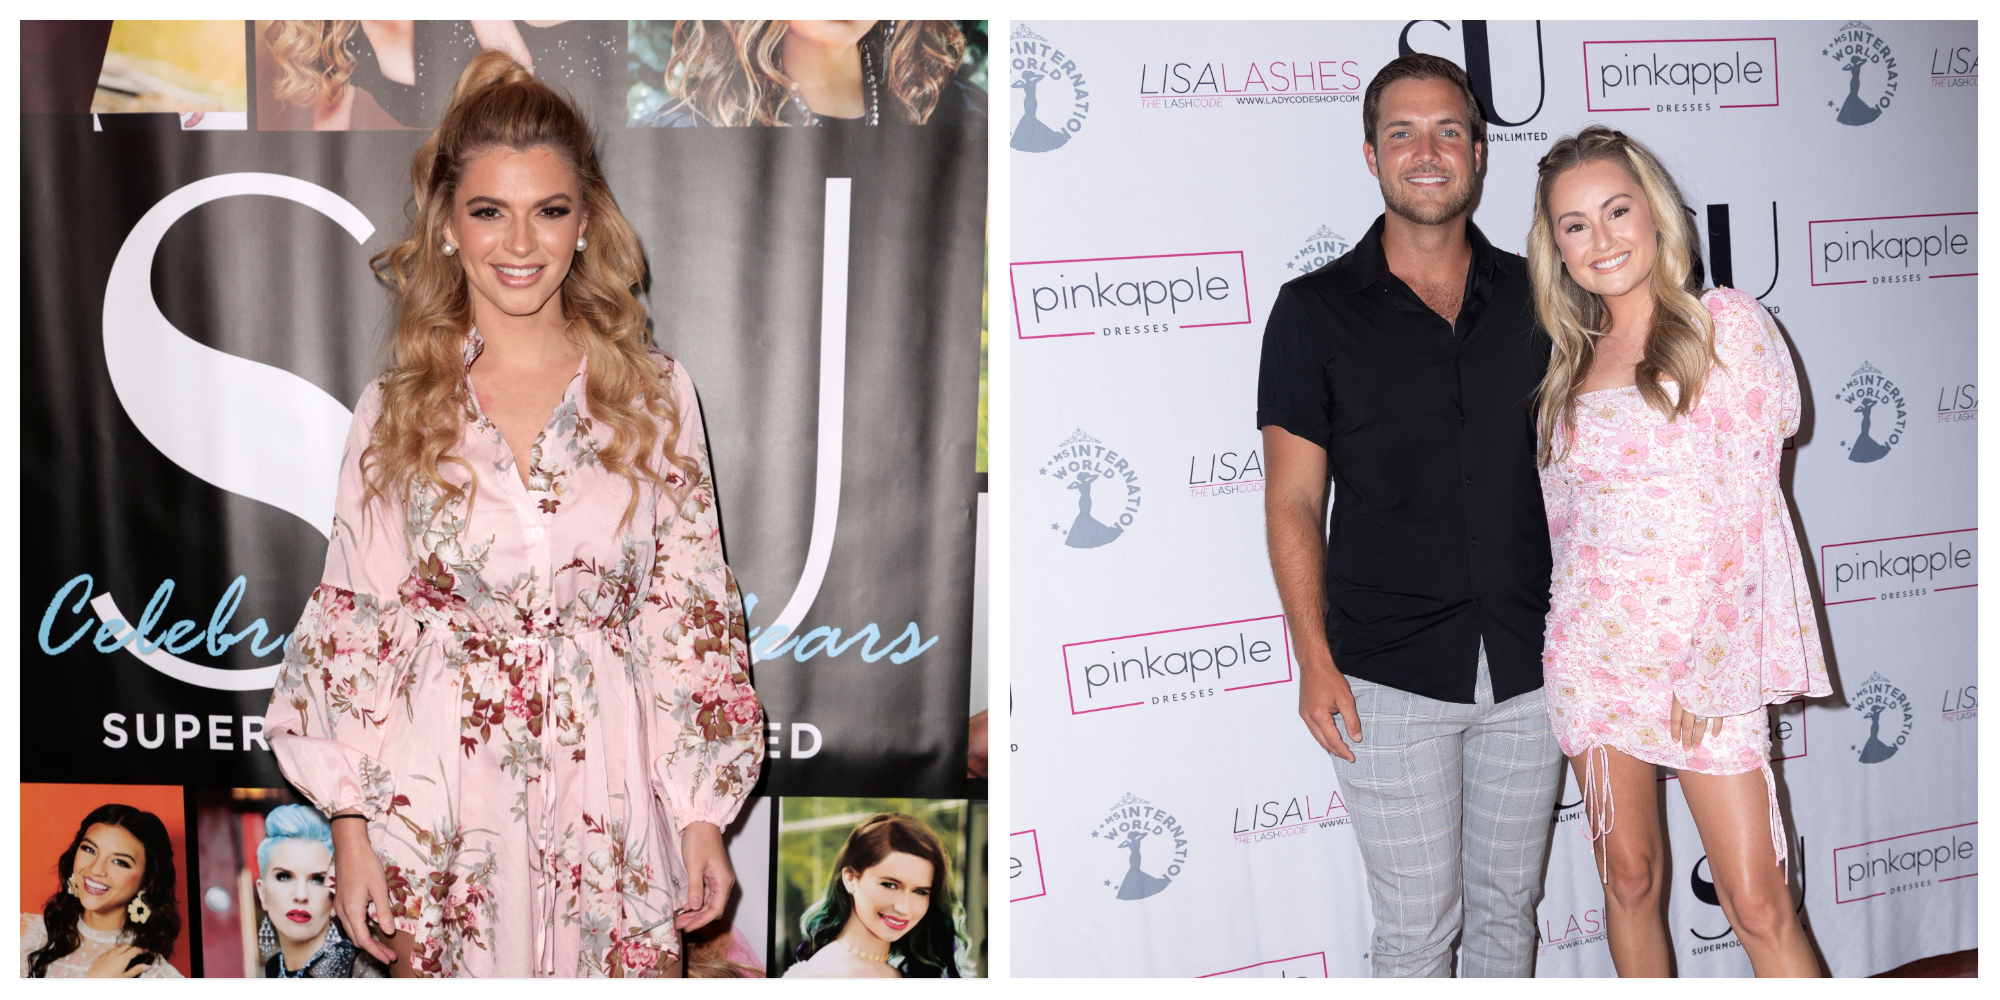 Kasey Cohen from 'Below Deck Med' poses for a photo at last year's Supermodels Unlimited Magazine event. Jordan Kimball and Christina Kimball from 'The Bachelorette' pose for photo at 2022 Supermodels Unlimited Magazine event. 